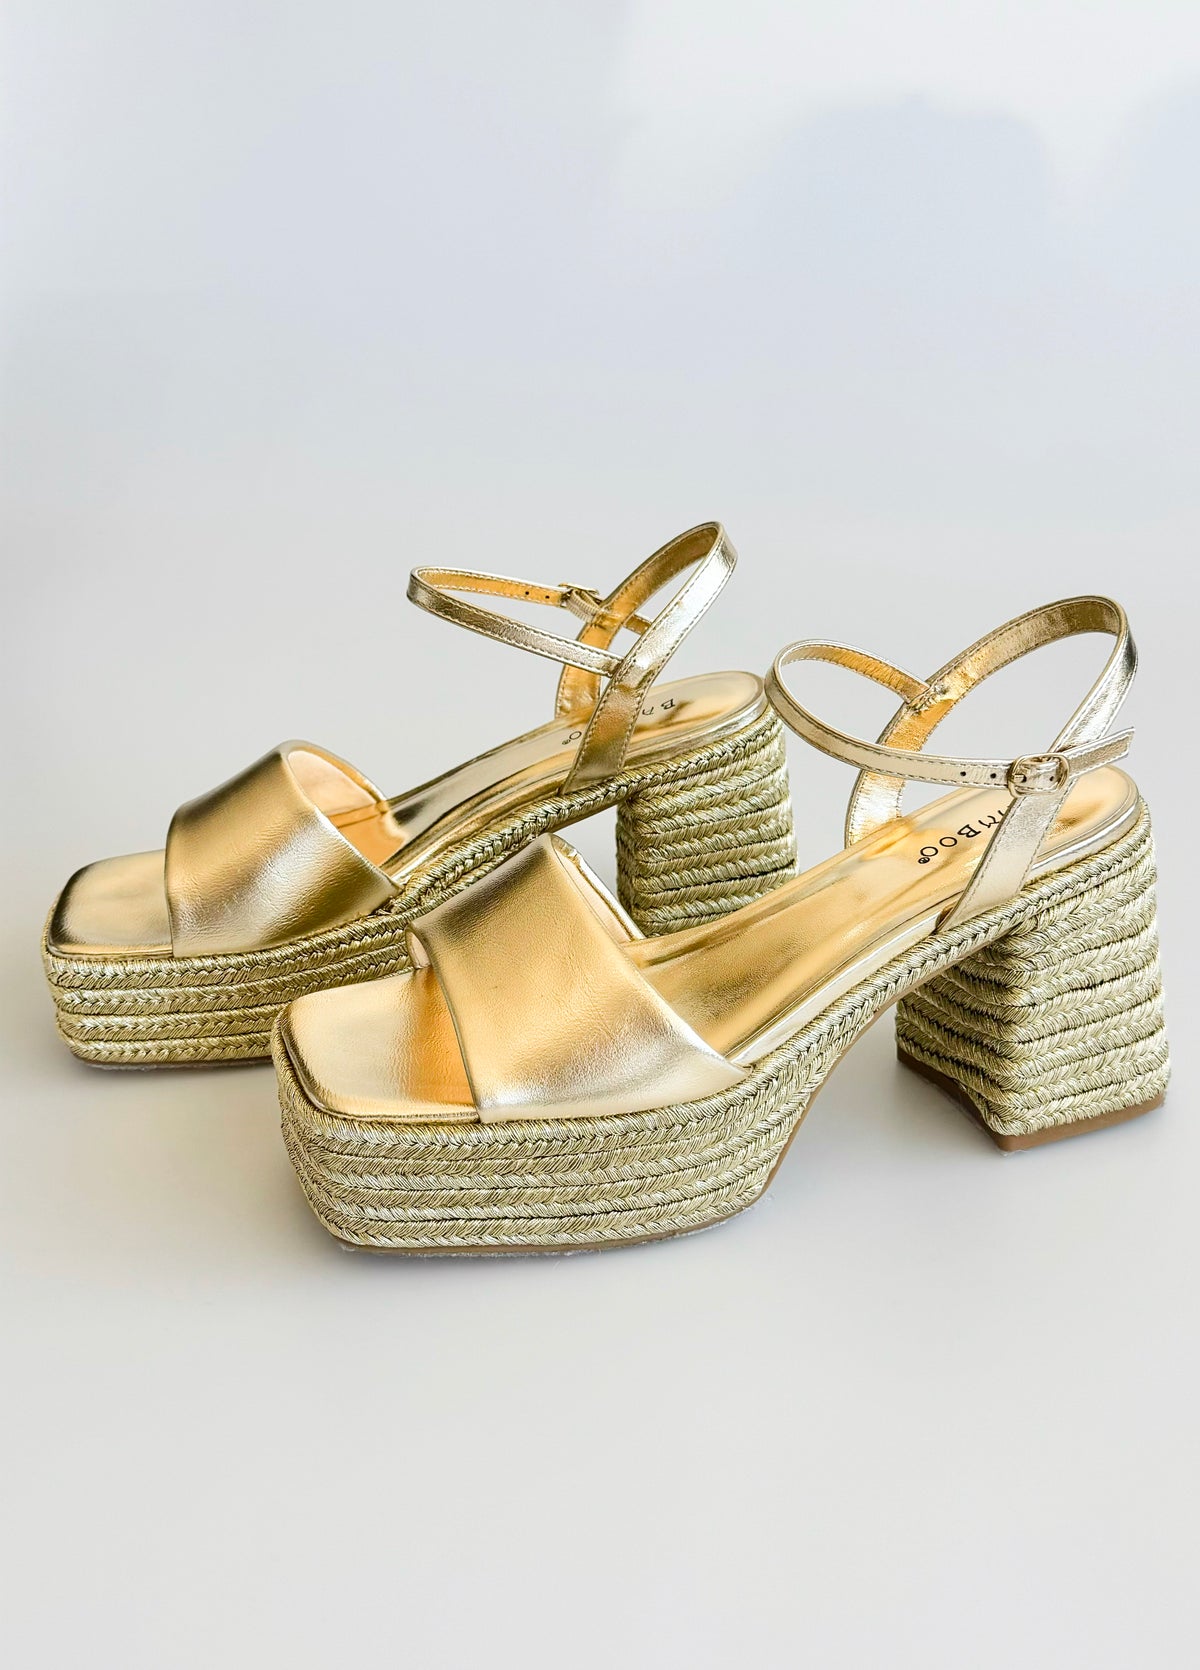 Platform Raffia High Heels-250 Shoes-Let´s see style-Coastal Bloom Boutique, find the trendiest versions of the popular styles and looks Located in Indialantic, FL